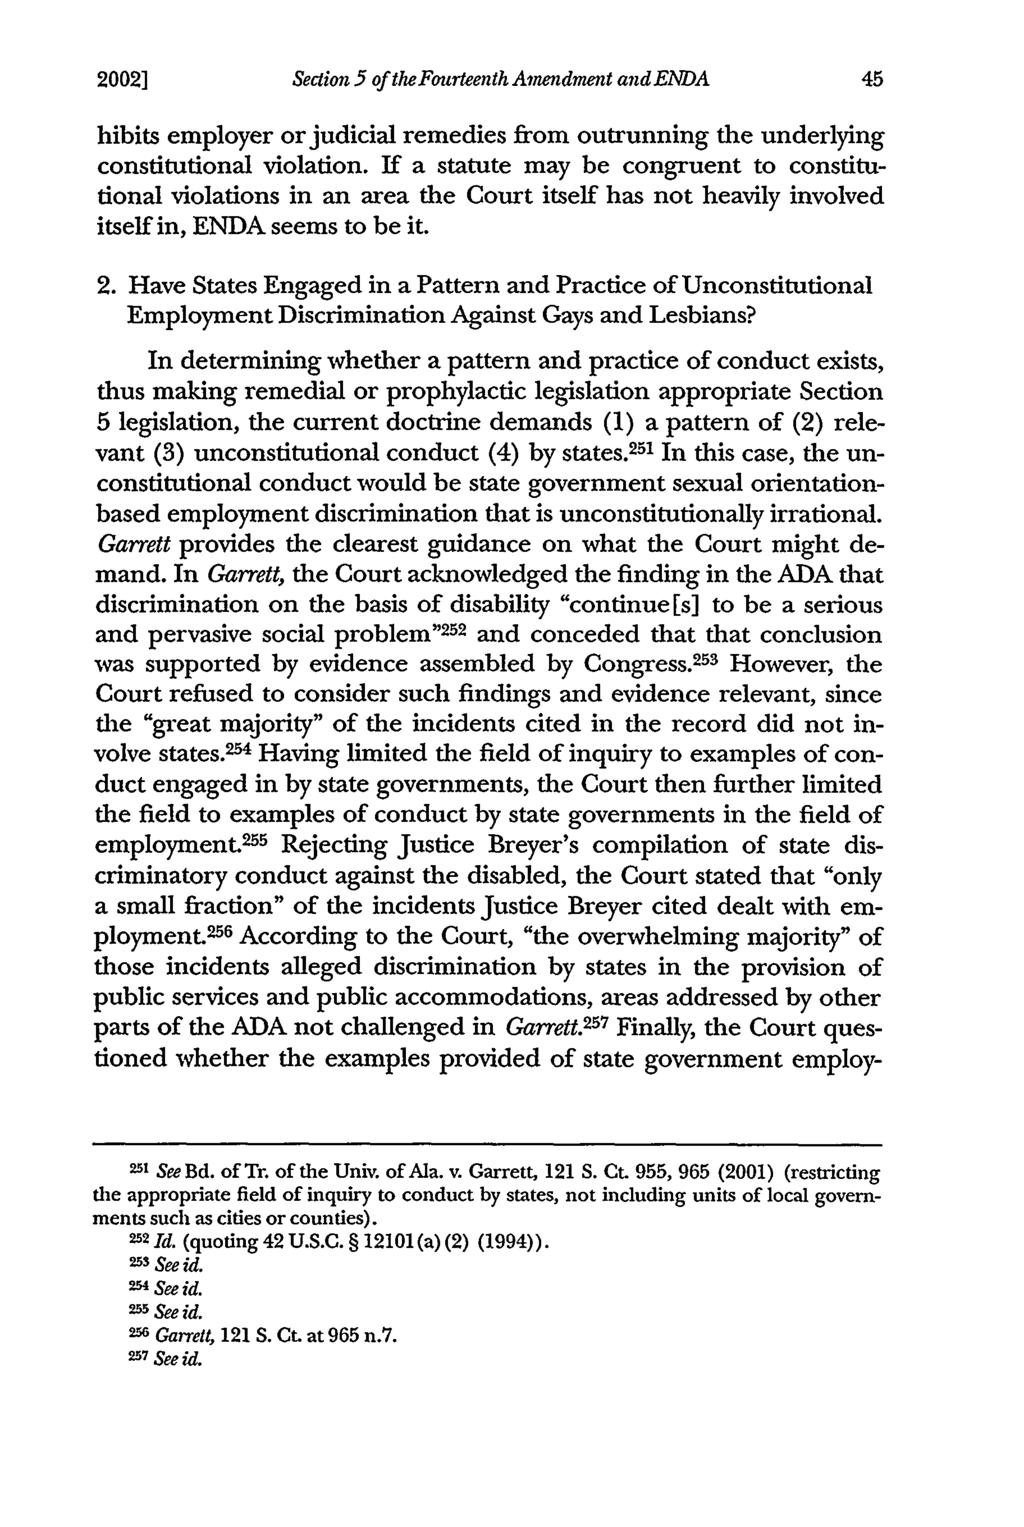 2002] Section 5 of the Fourteenth Amendment and ENDA hibits employer or judicial remedies from outrunning the underlying constitutional violation.